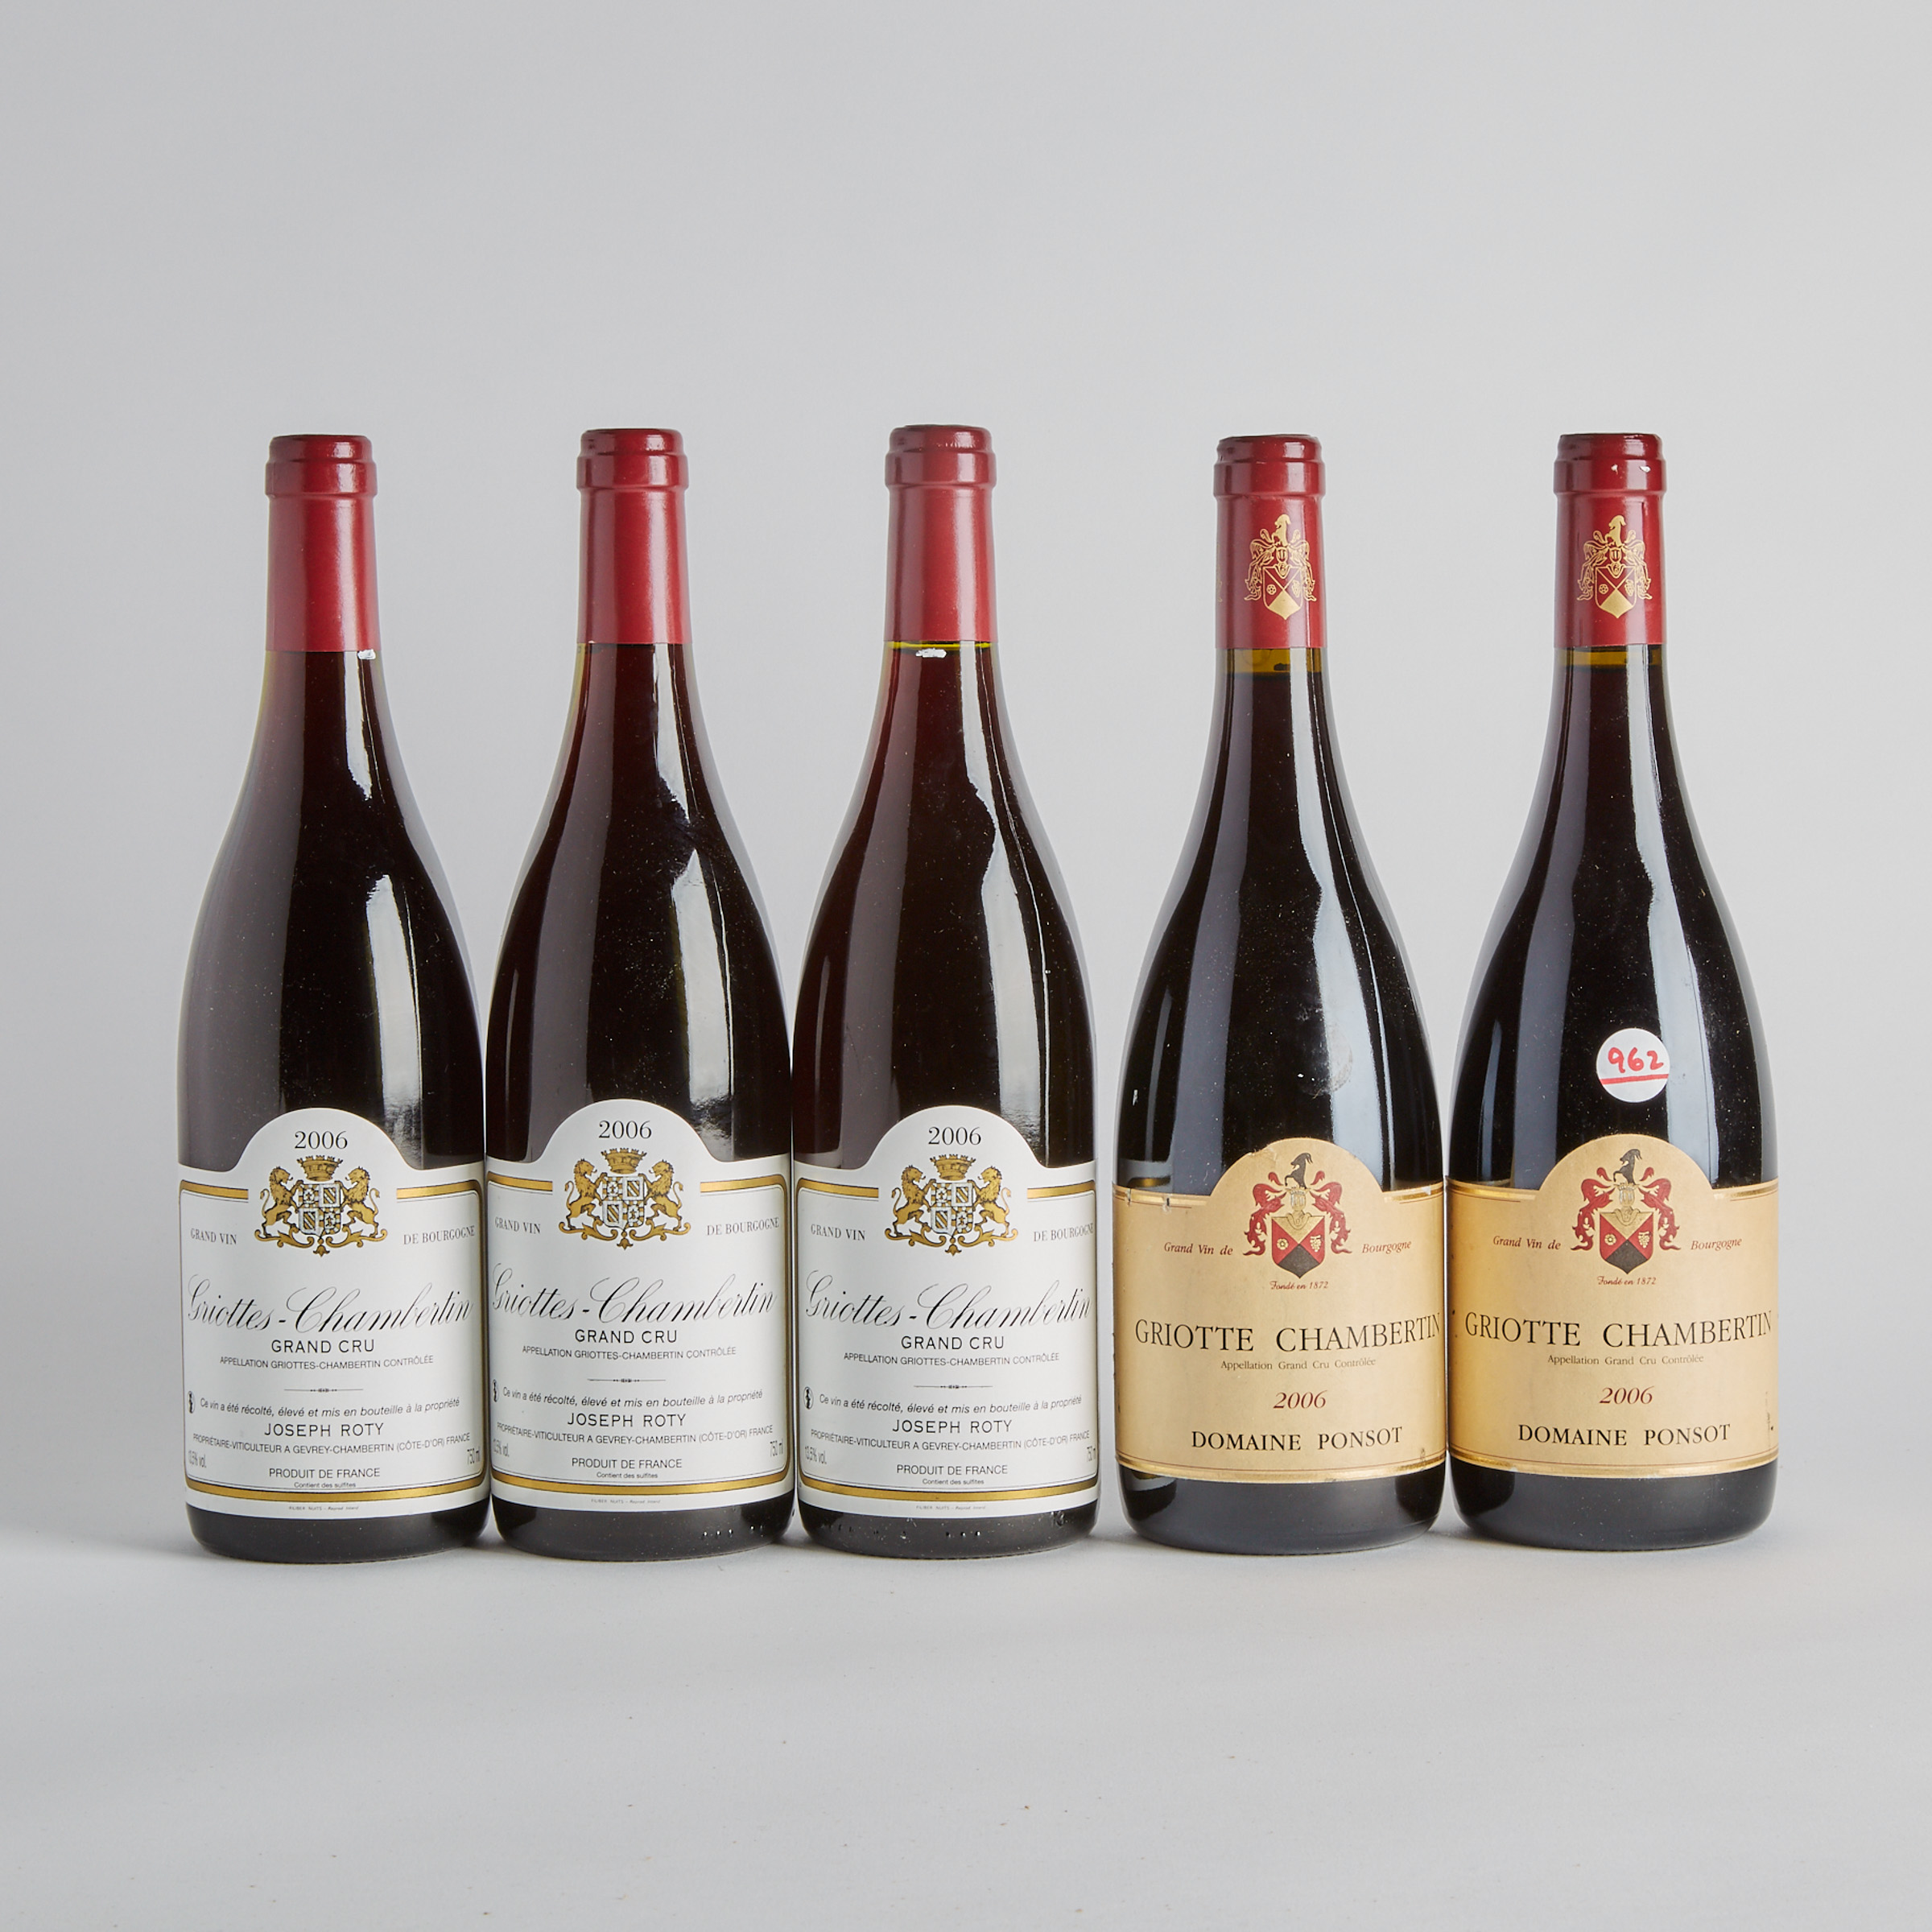 DOMAINE J. ROTY GRIOTTES-CHAMBERTIN 2006 (3)
DOMAINE PONSOT GRIOTTE-CHAMBERTIN 2006 (2)